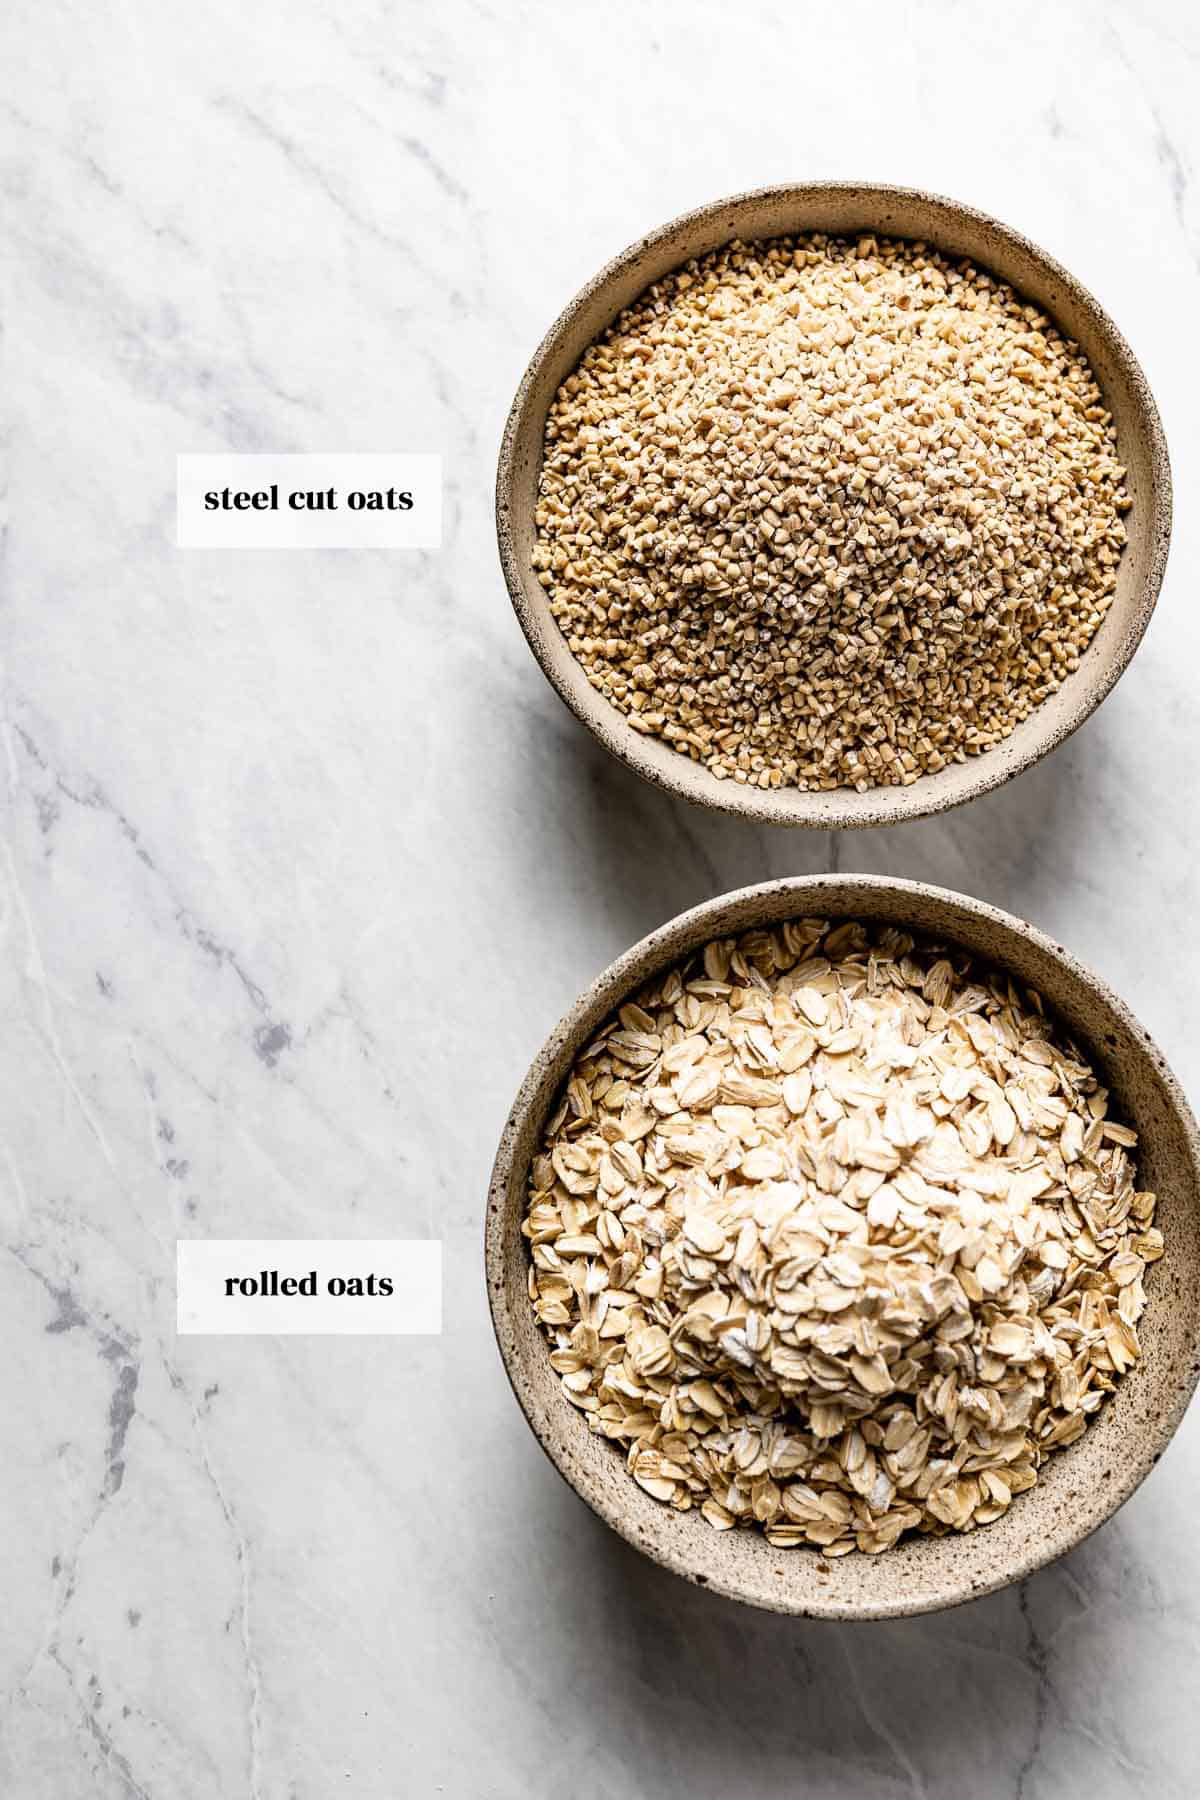 A bowl of steel cut oat and another one with regular oats from the top view.